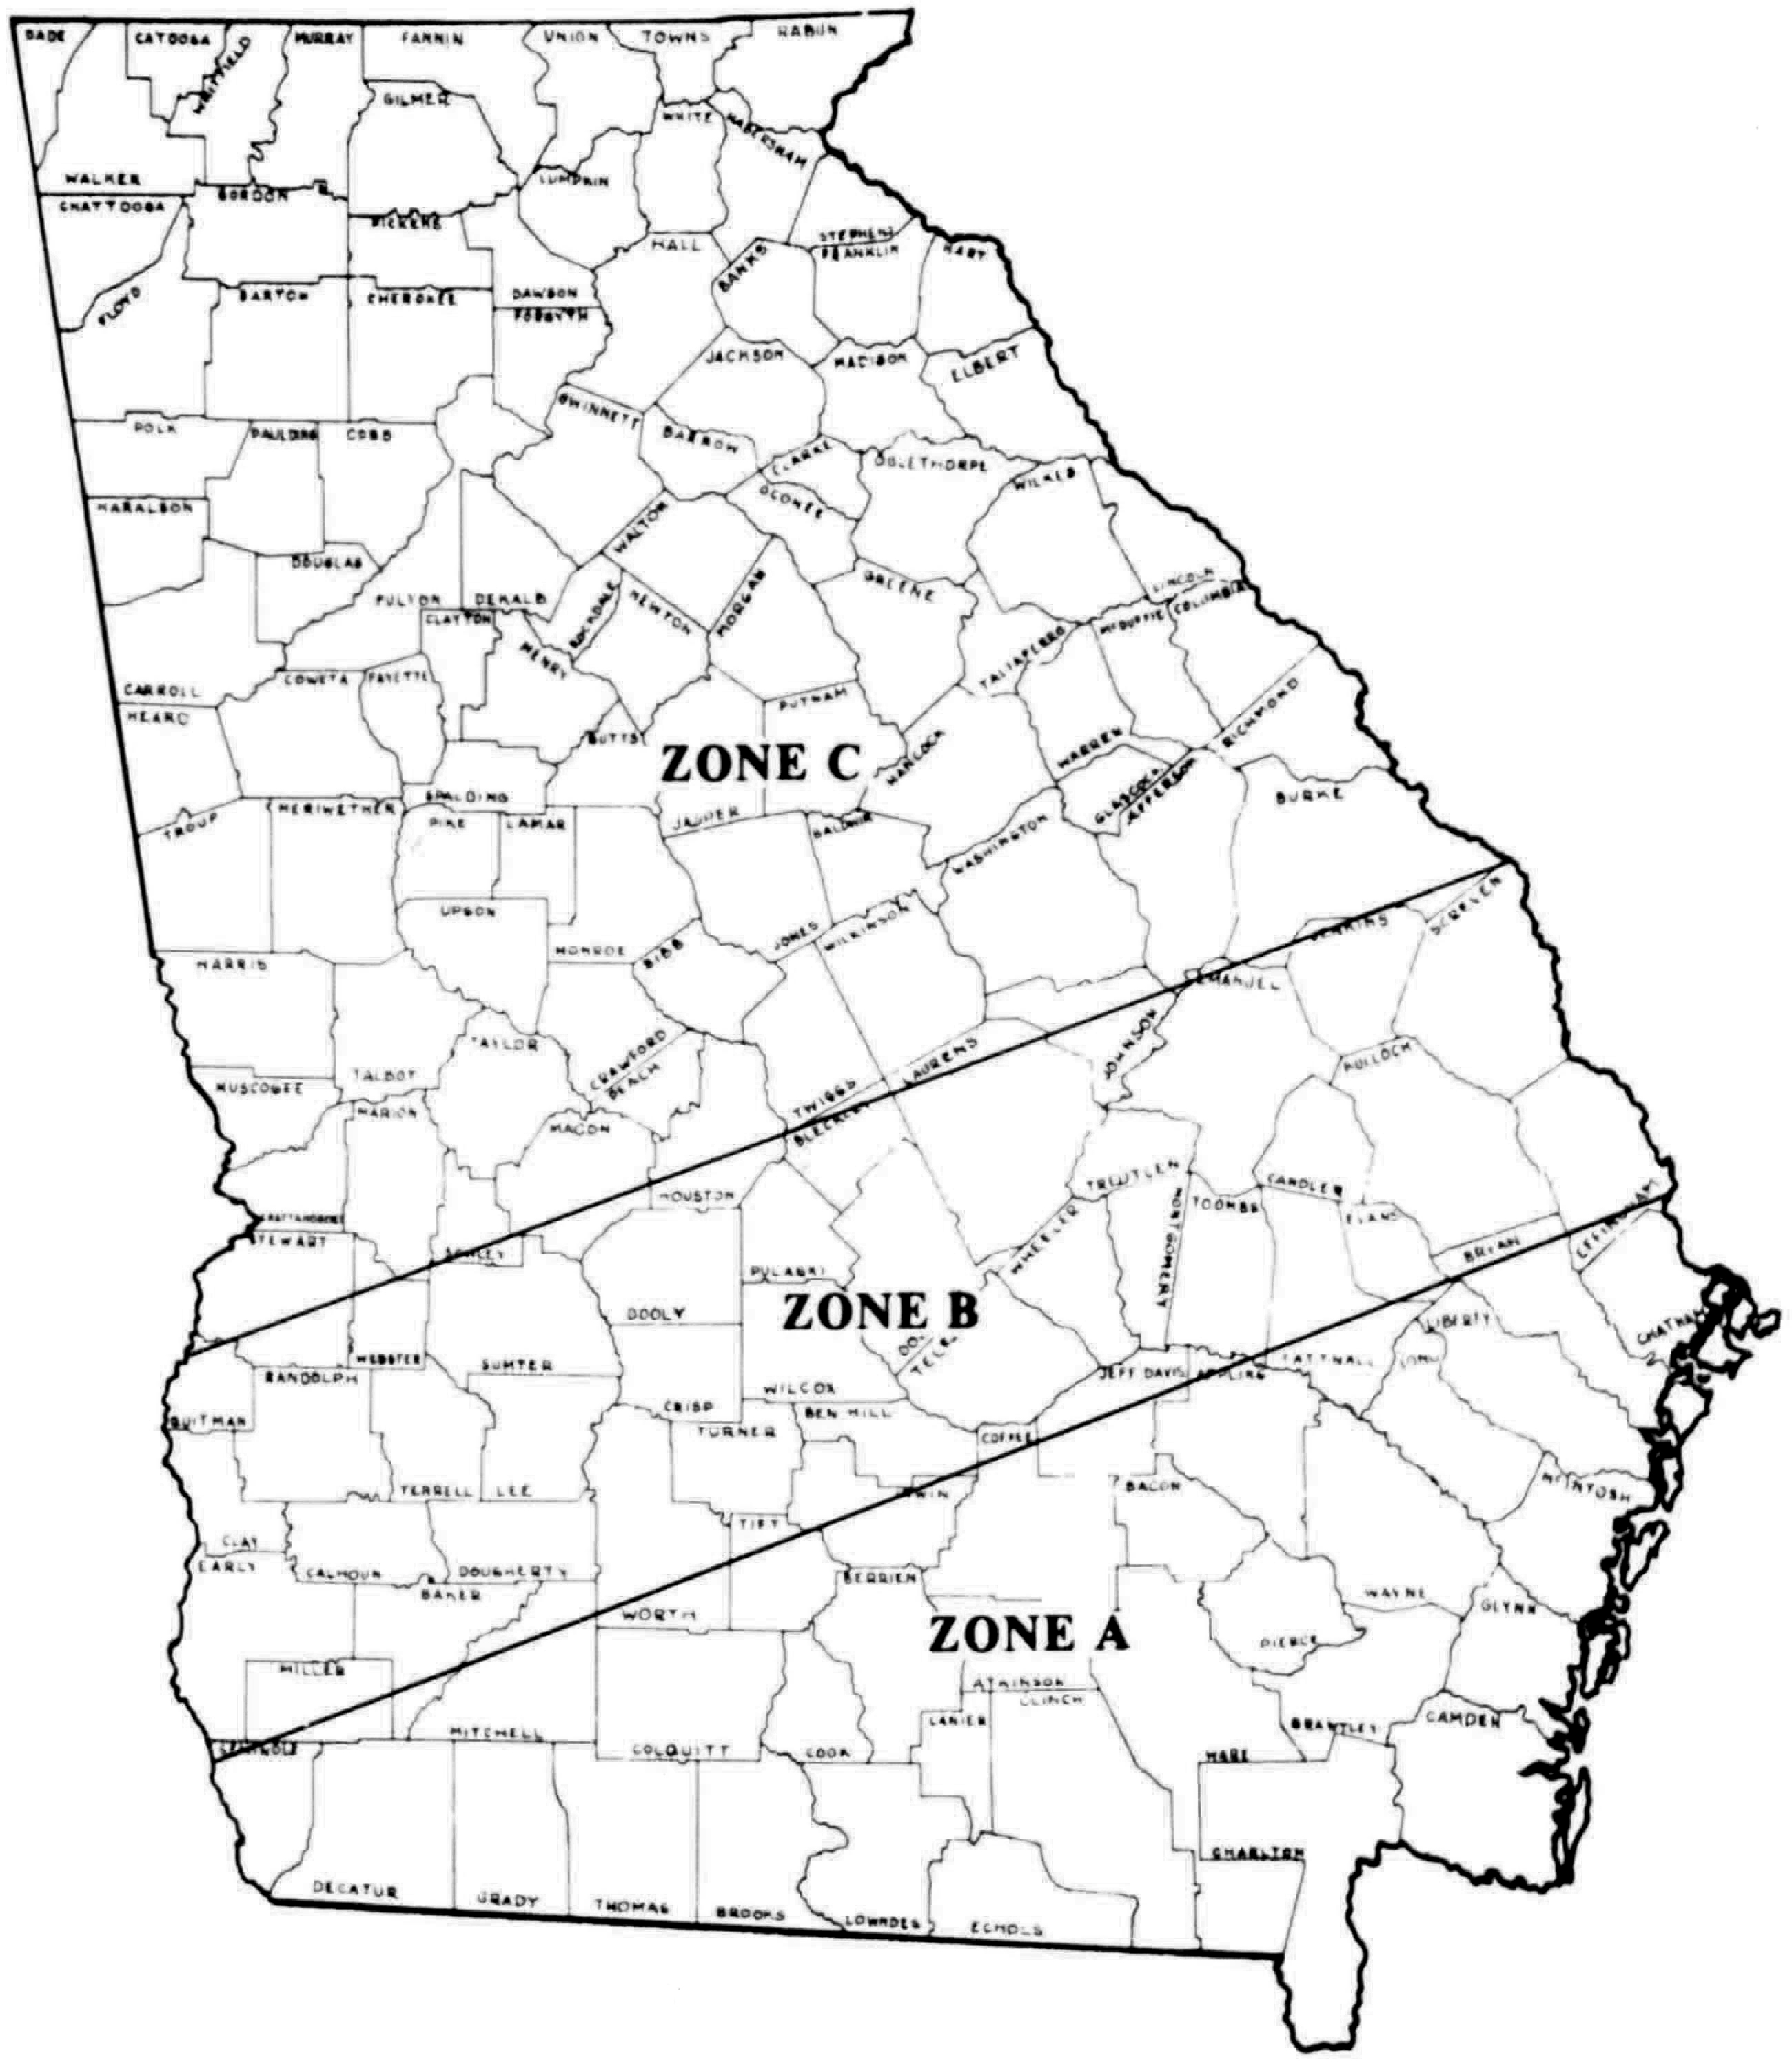 Zone map of Georgia. Most of the state is Zone C, with a stripe of Zone B below the fall line and Zone A in the south and coastal parts of the state.